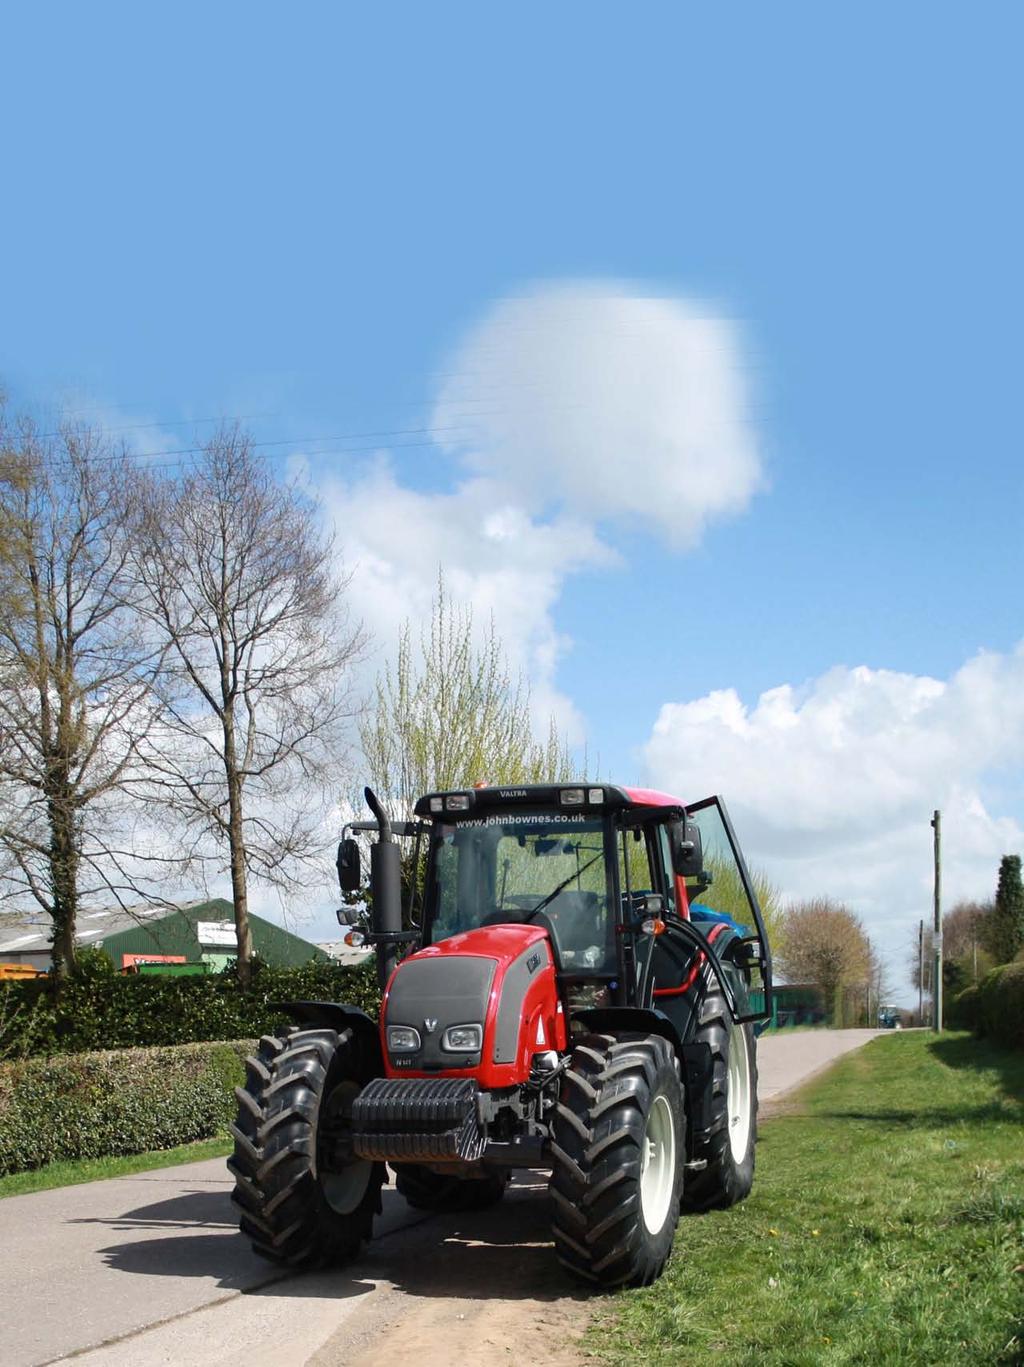 Cheshire Rural Crime The items most commonly targeted by thieves across Cheshire over the last 12 months were all terrain vehicles such as quad bikes, plant machinery, tools and fuel, including